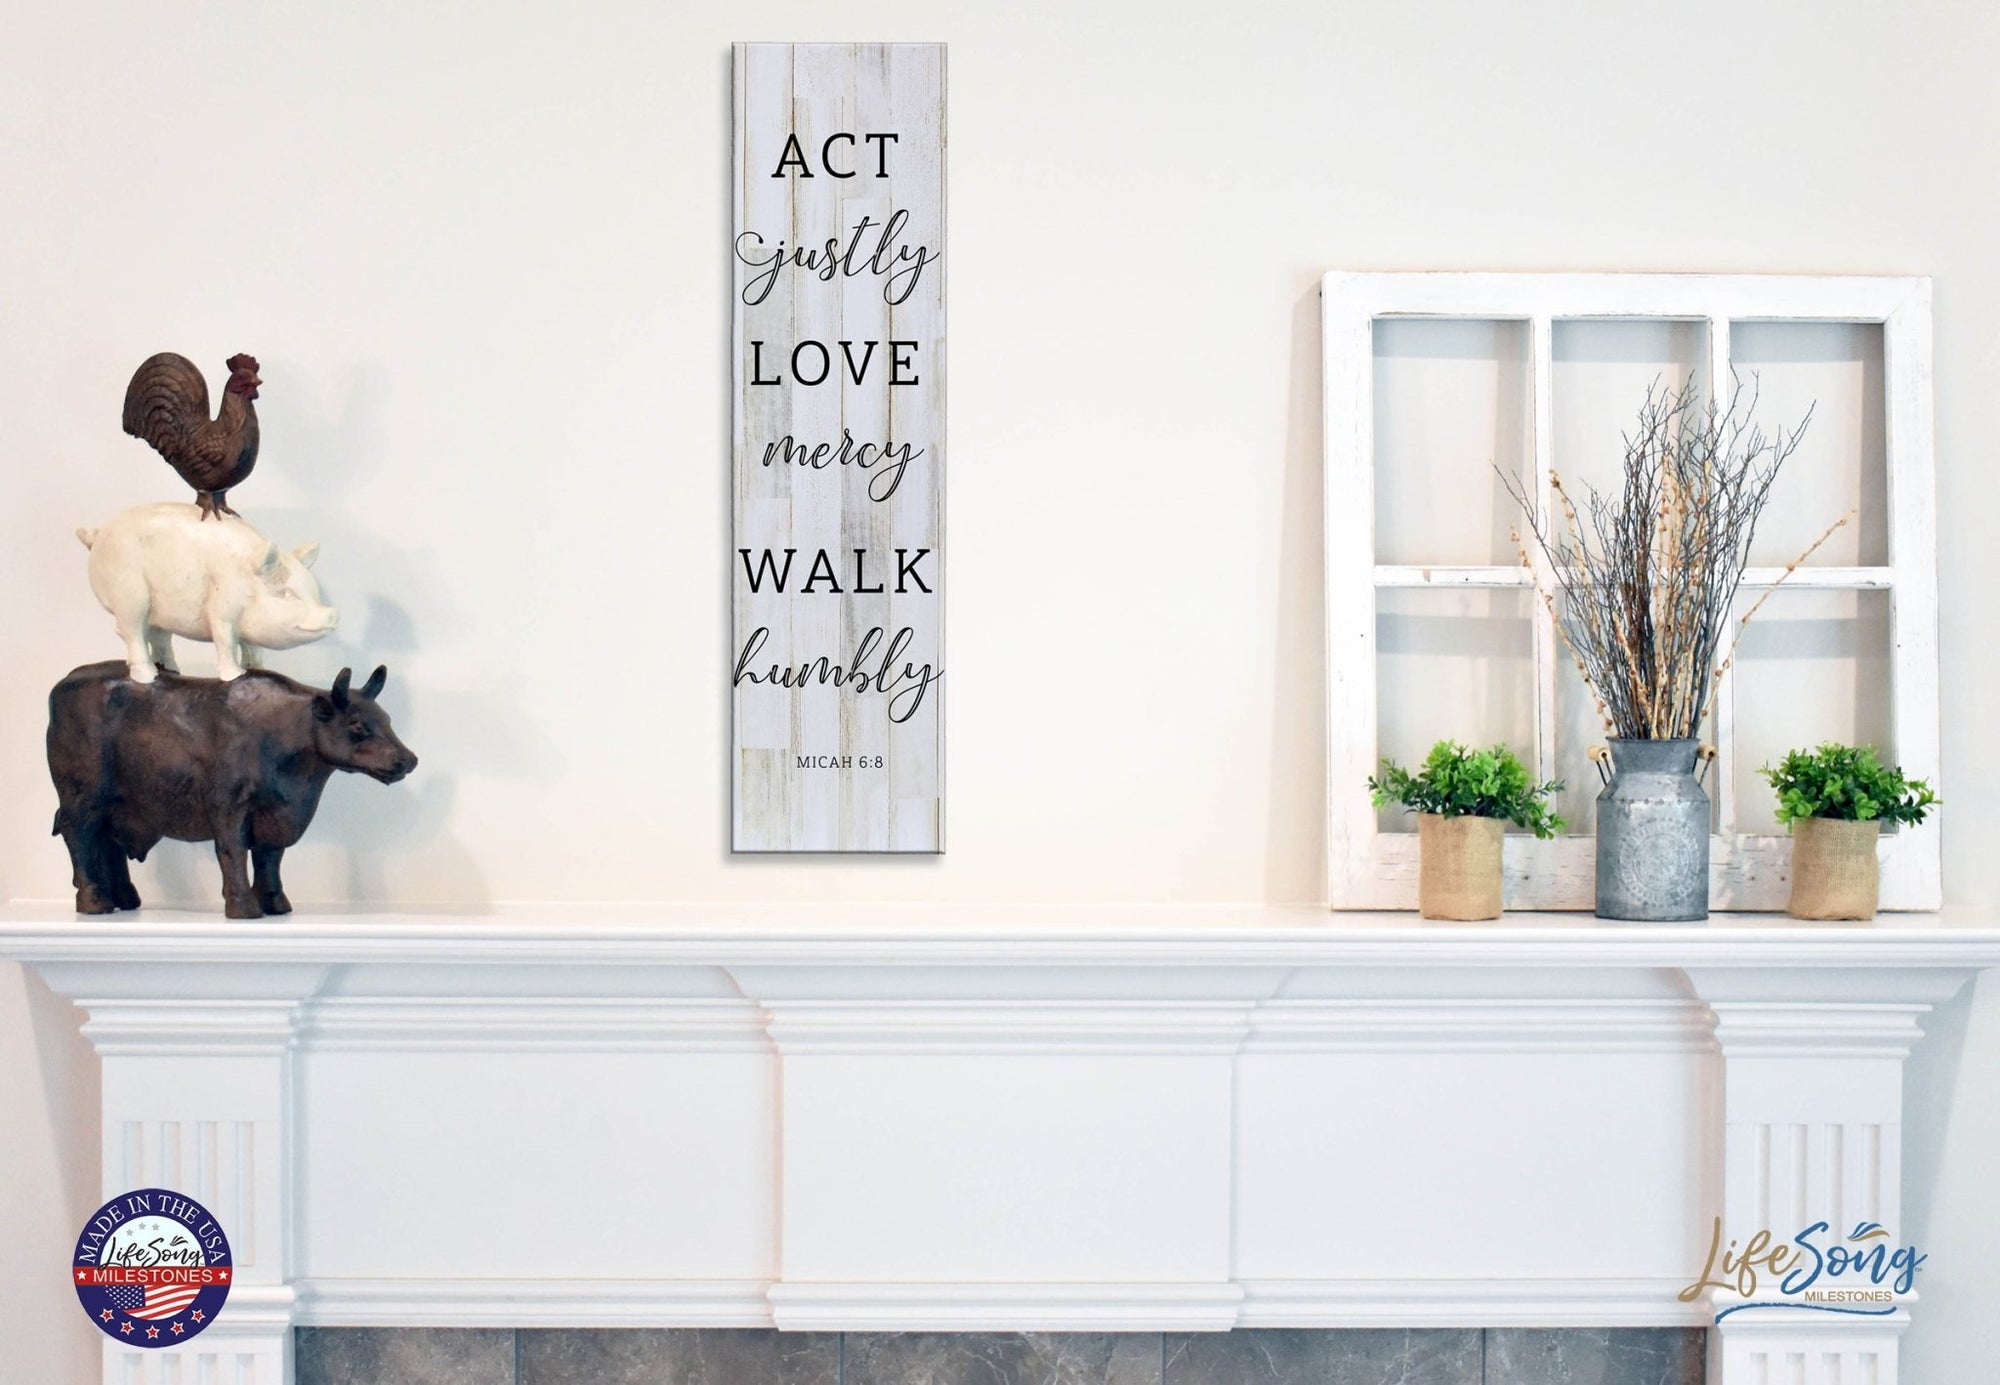 Inspirational Modern Wooden Wall Hanging Plaque 10x40 - Act Justly Love mercy - LifeSong Milestones